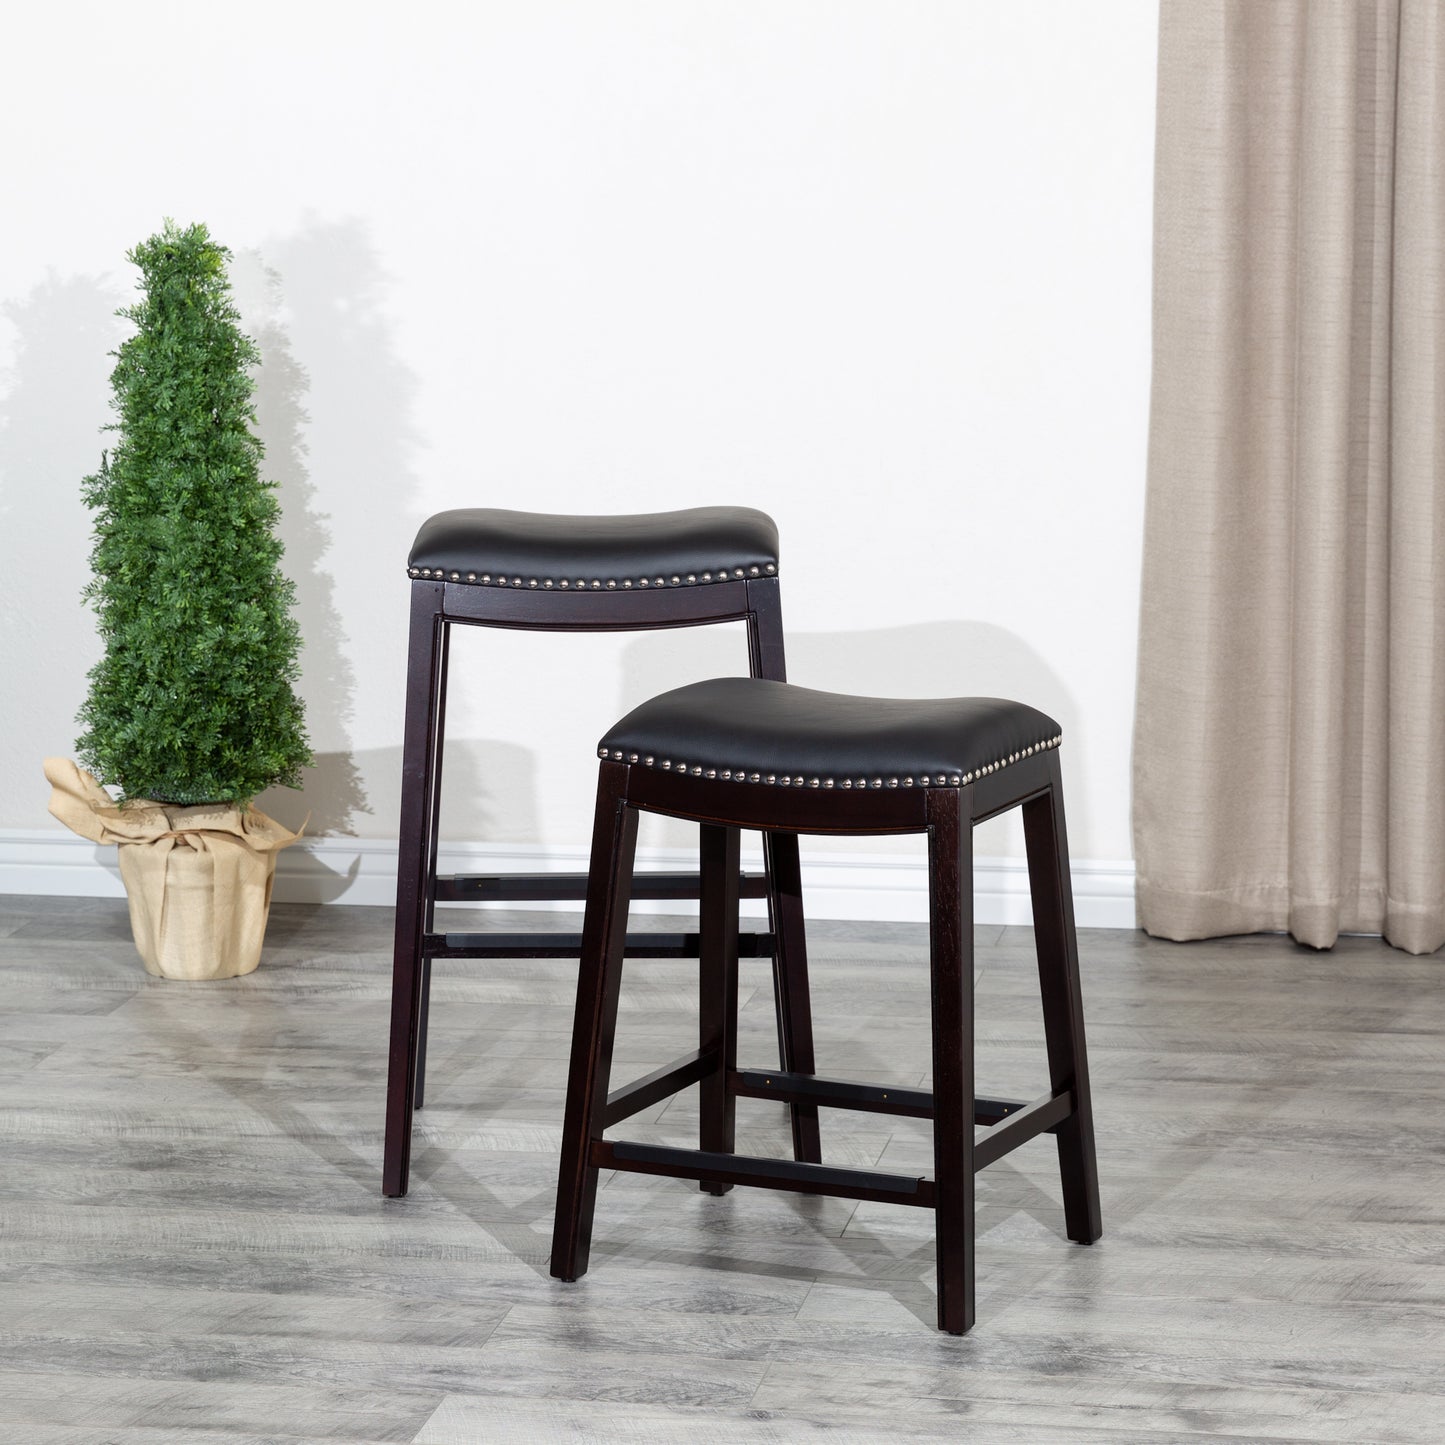 30" Bar Stool with Espresso Finish and Black Leather Seat